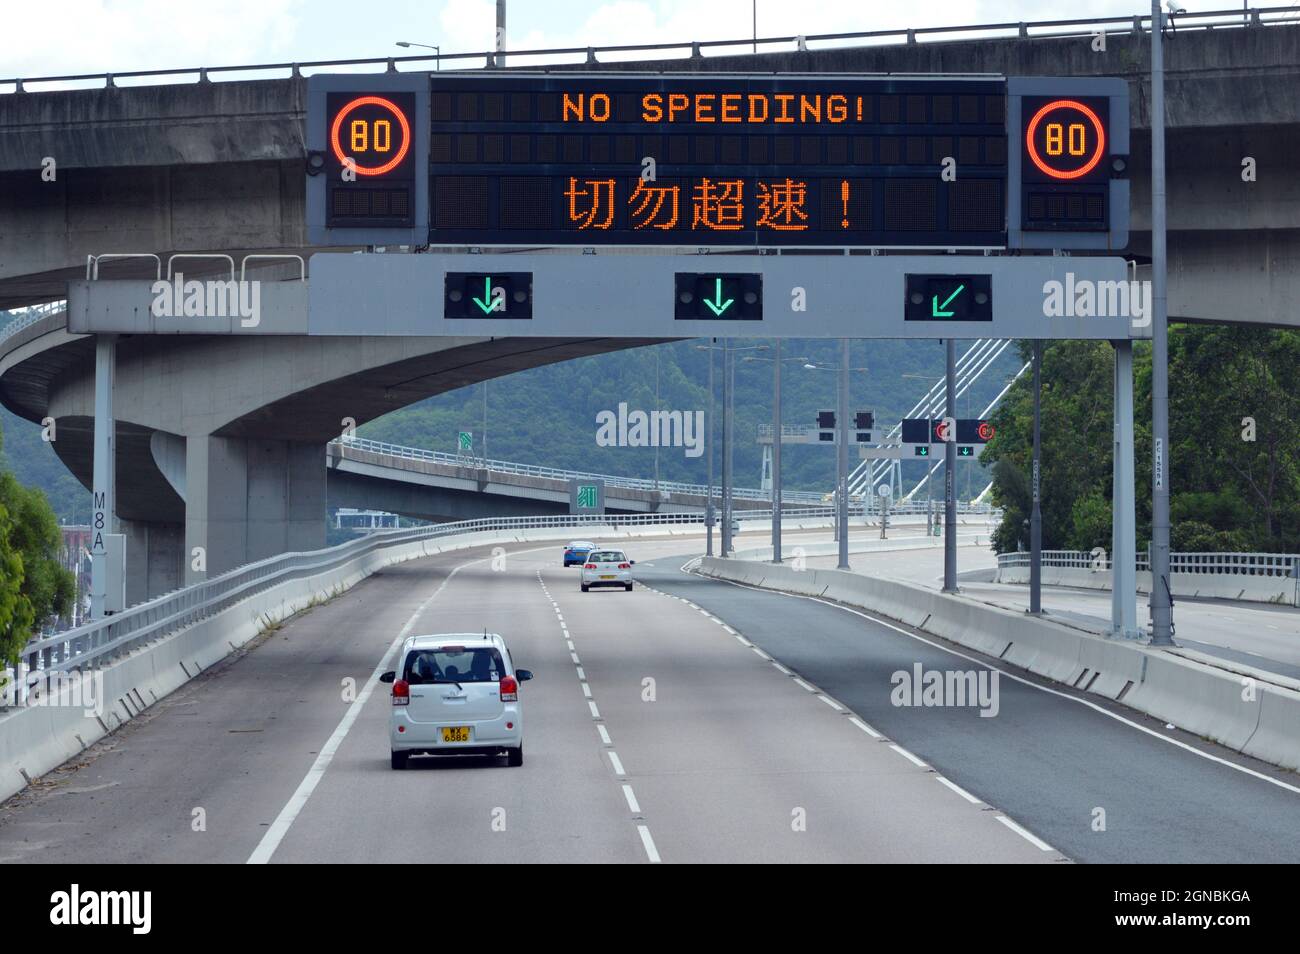 Southbound carriageway of Tsing Long Highway north of Ting Kau Bridge, Hong Kong with variable message sign Stock Photo